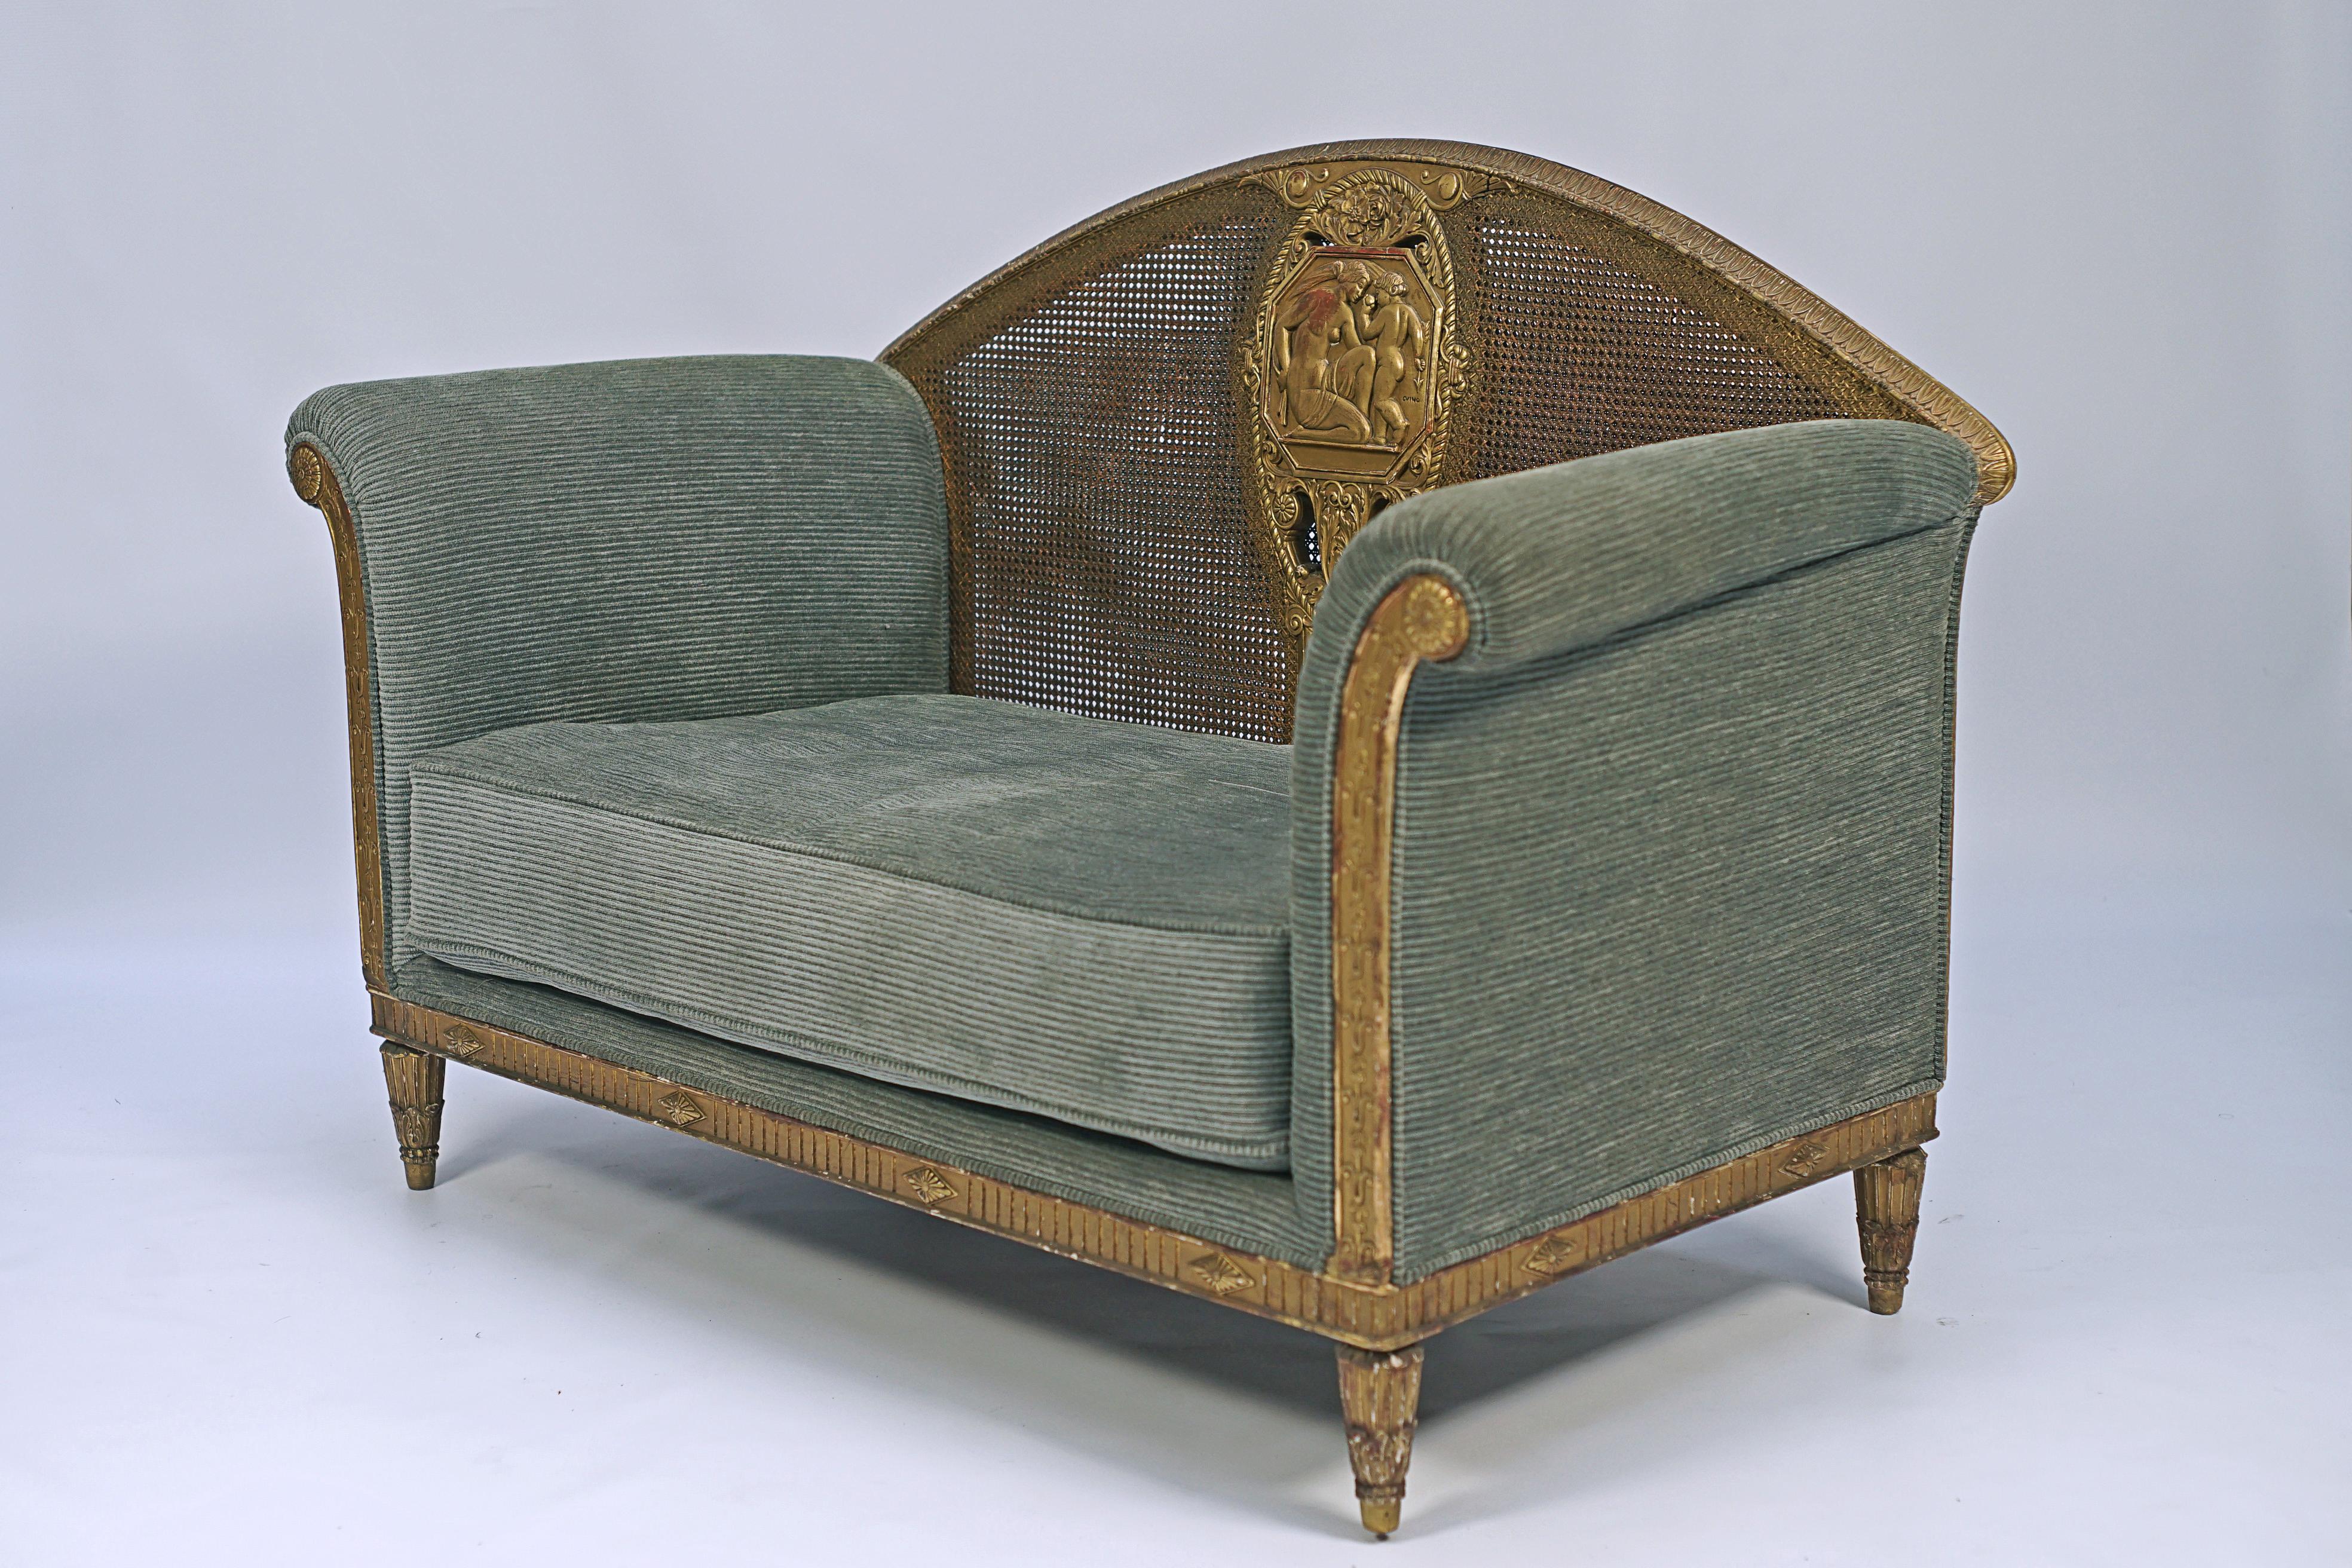 Sofa in carved and gilded wood with a curved back and double matting designed by Richard Guino (1890–1973). Central medallion representing Venus and Cupid signed 